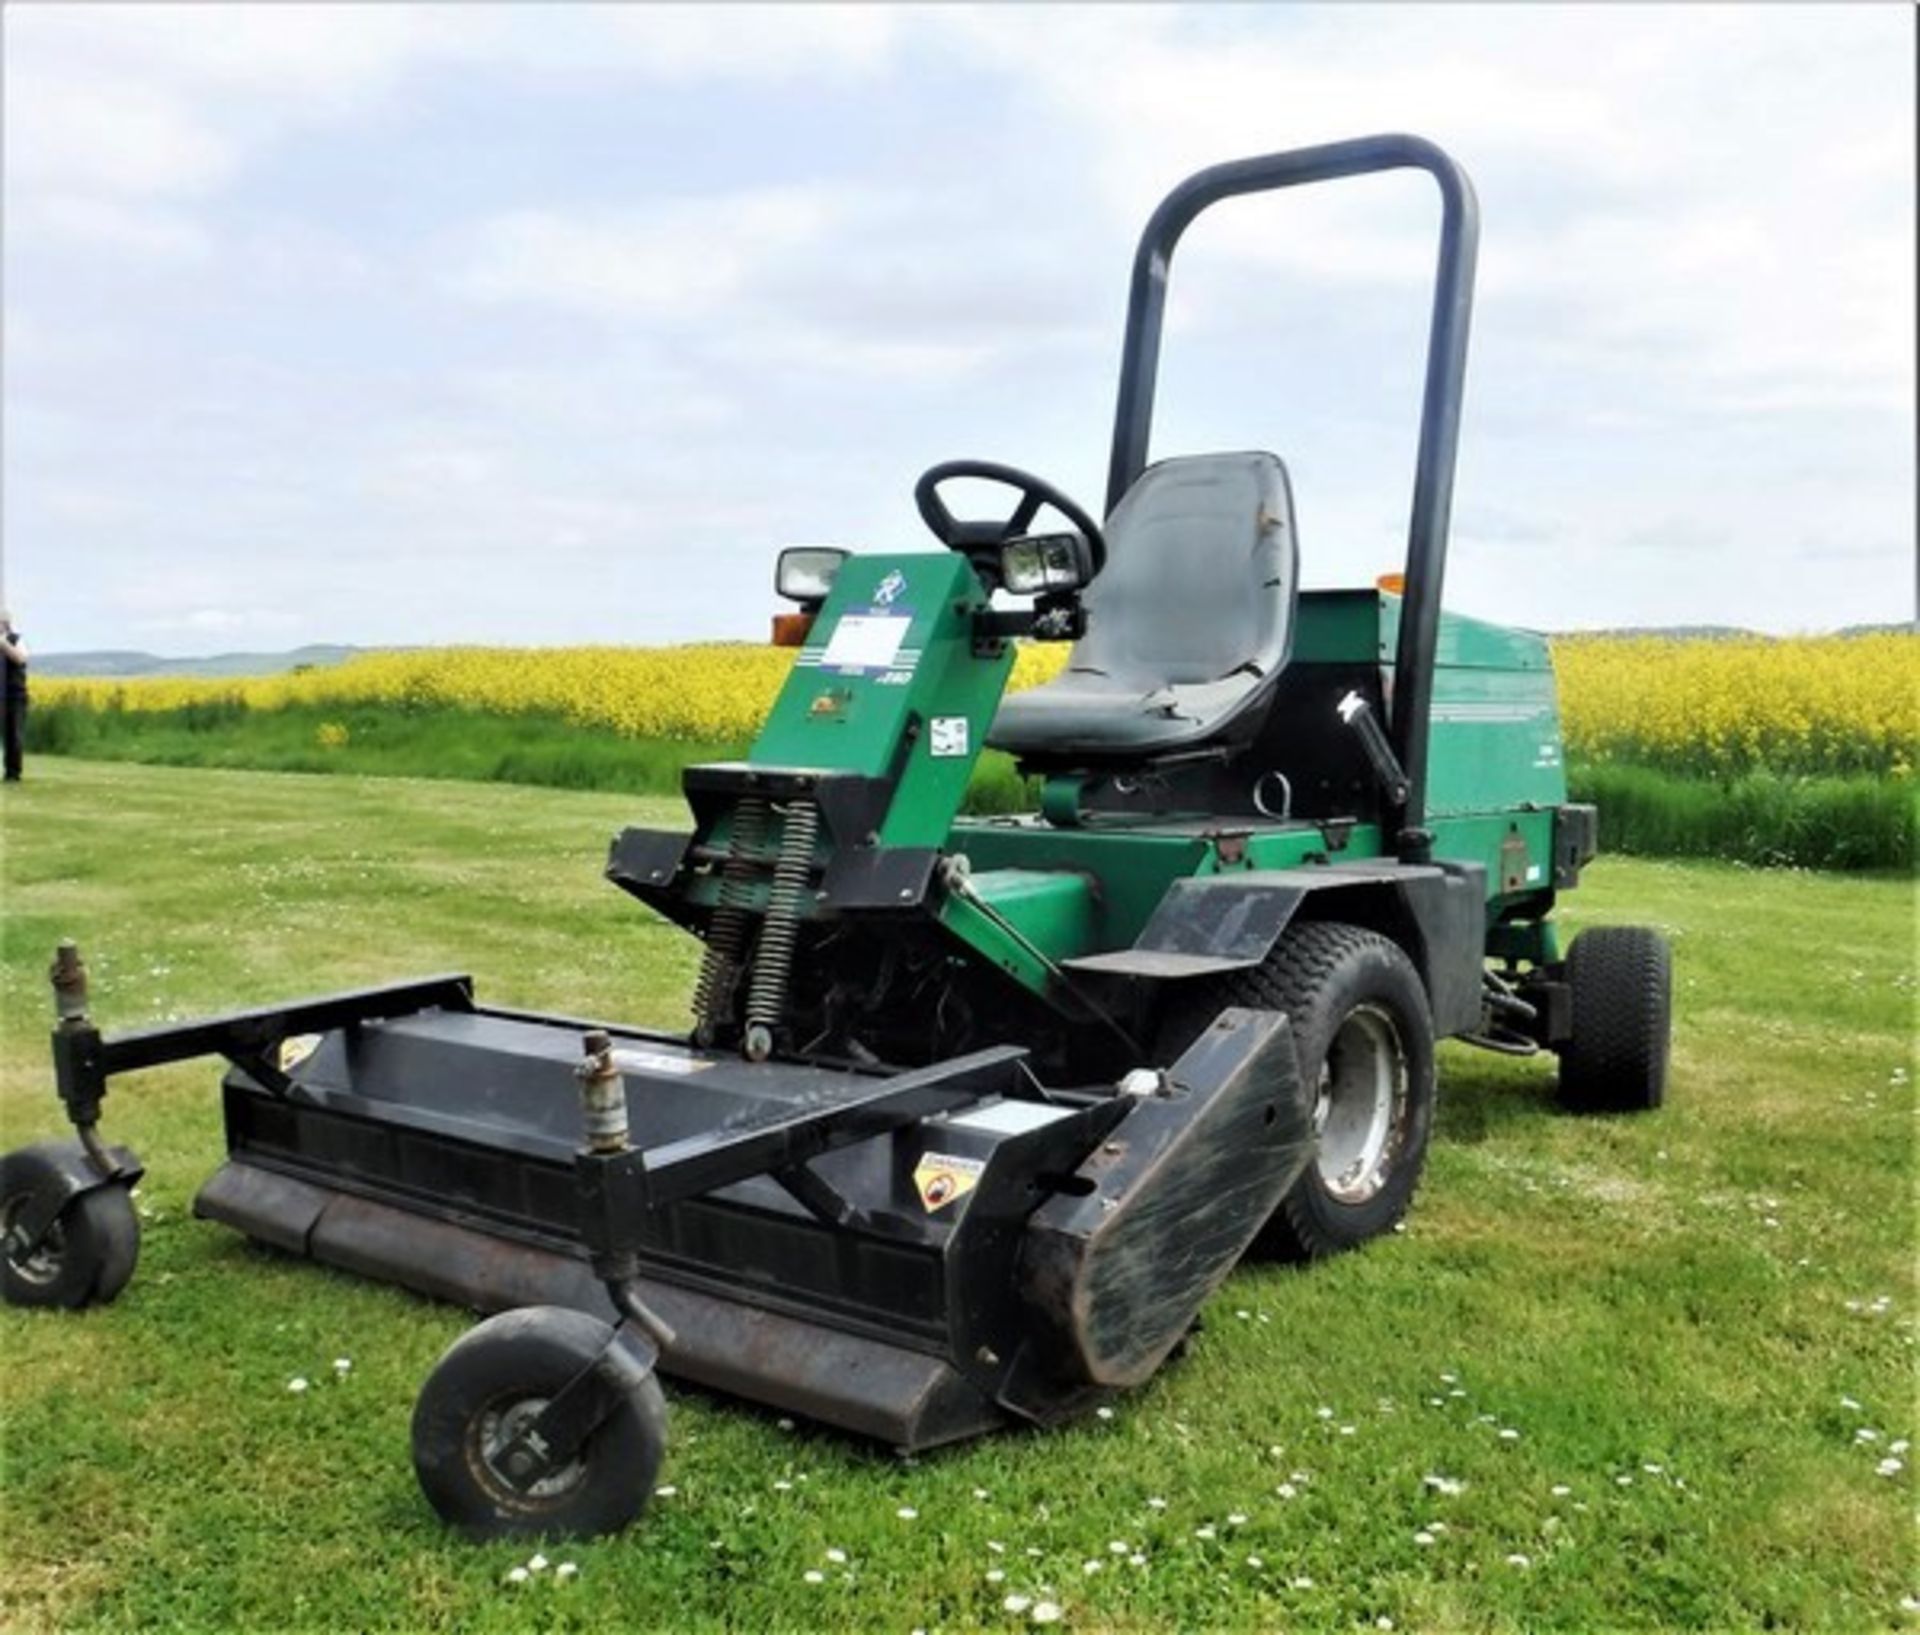 RANSOMES FRONT LINE 7280 ride on mower. Reg - Y106BSX. 4029hrs (not verified)